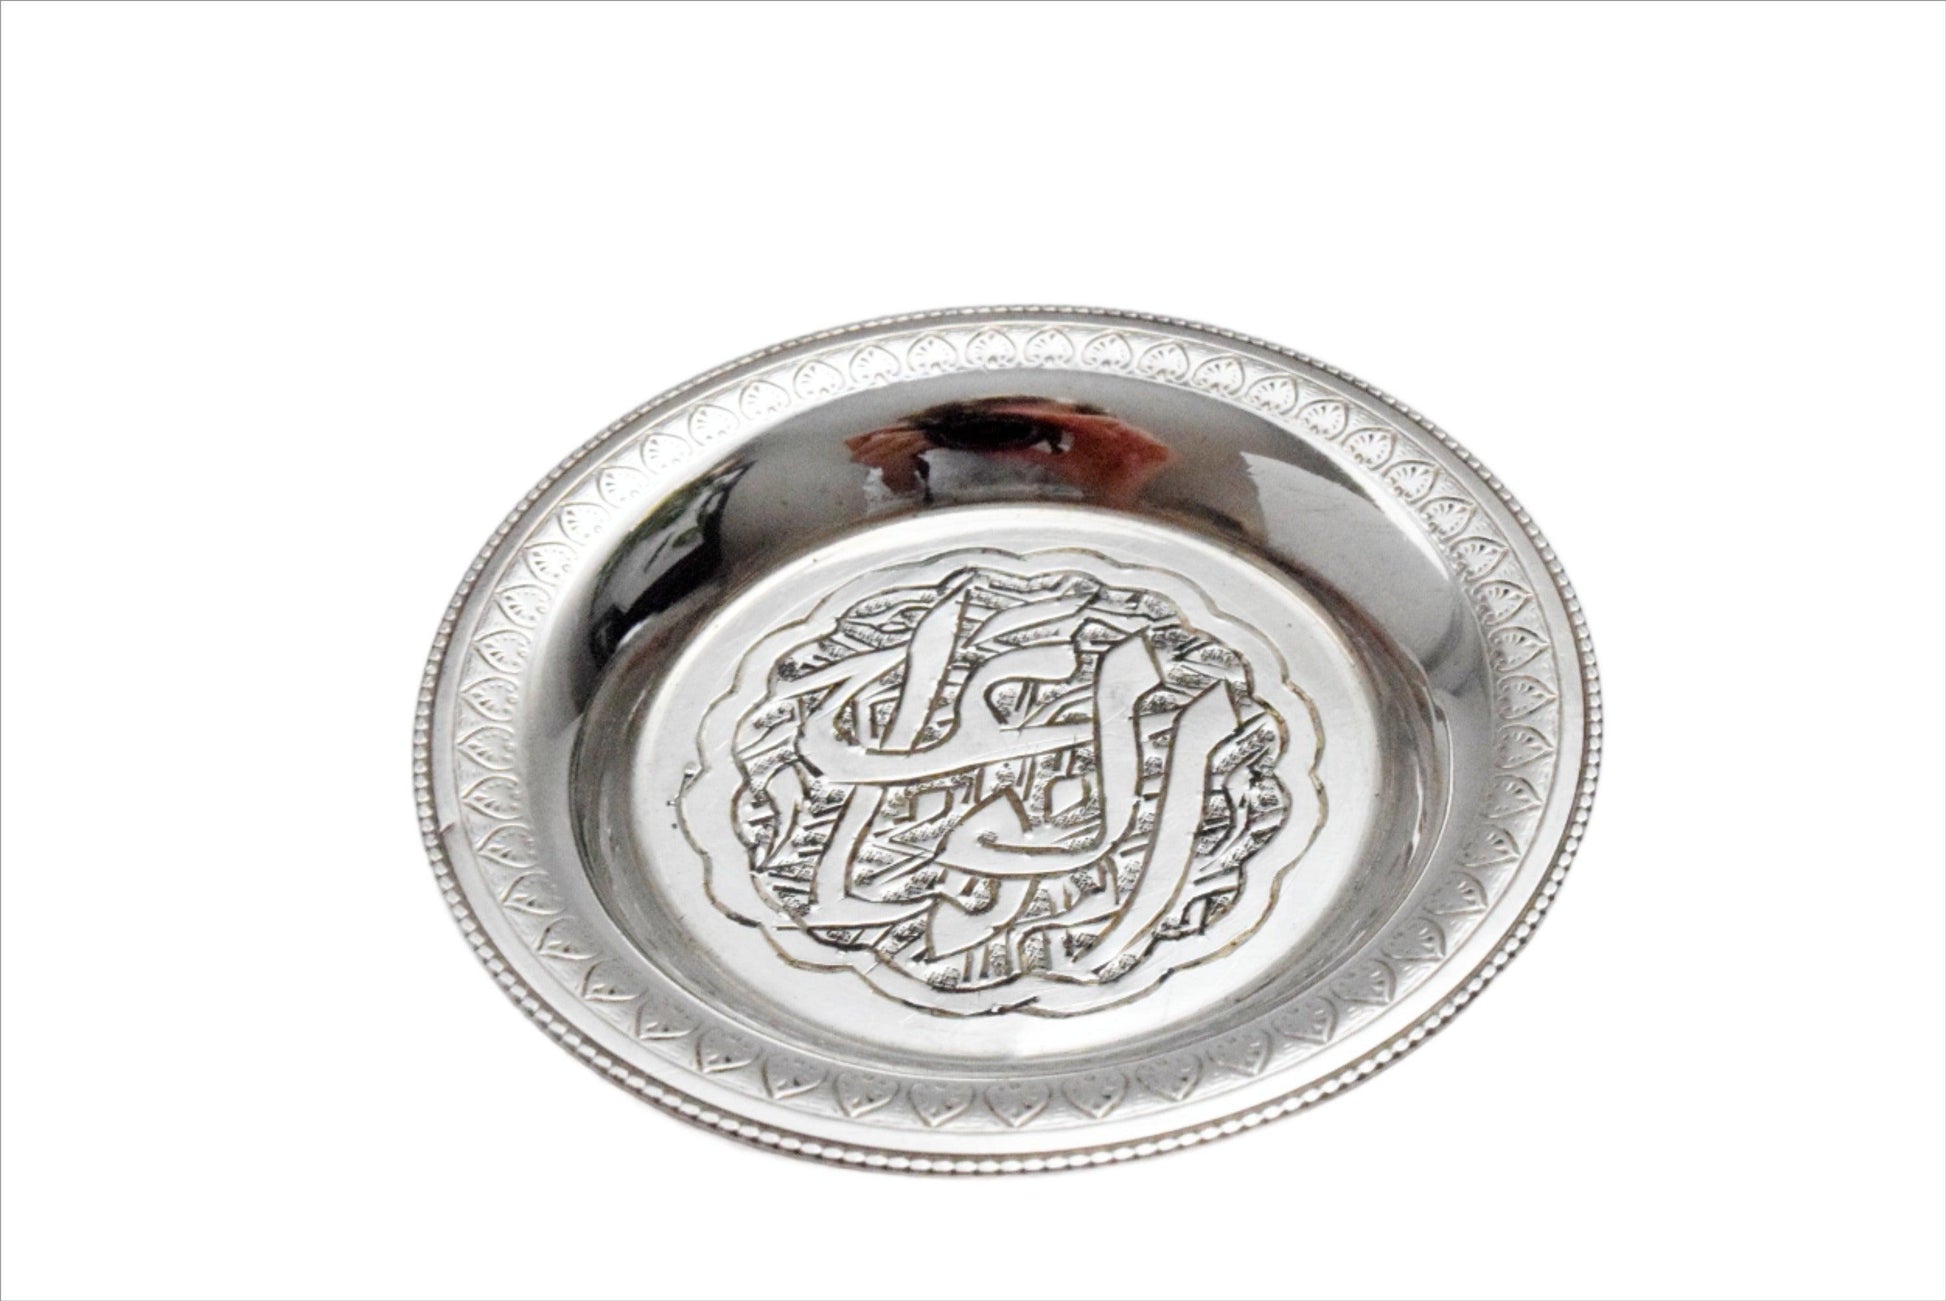 Vintage Silver Dish for Pins or Rings with Arabic Calligraphy from Egypt - Anteeka